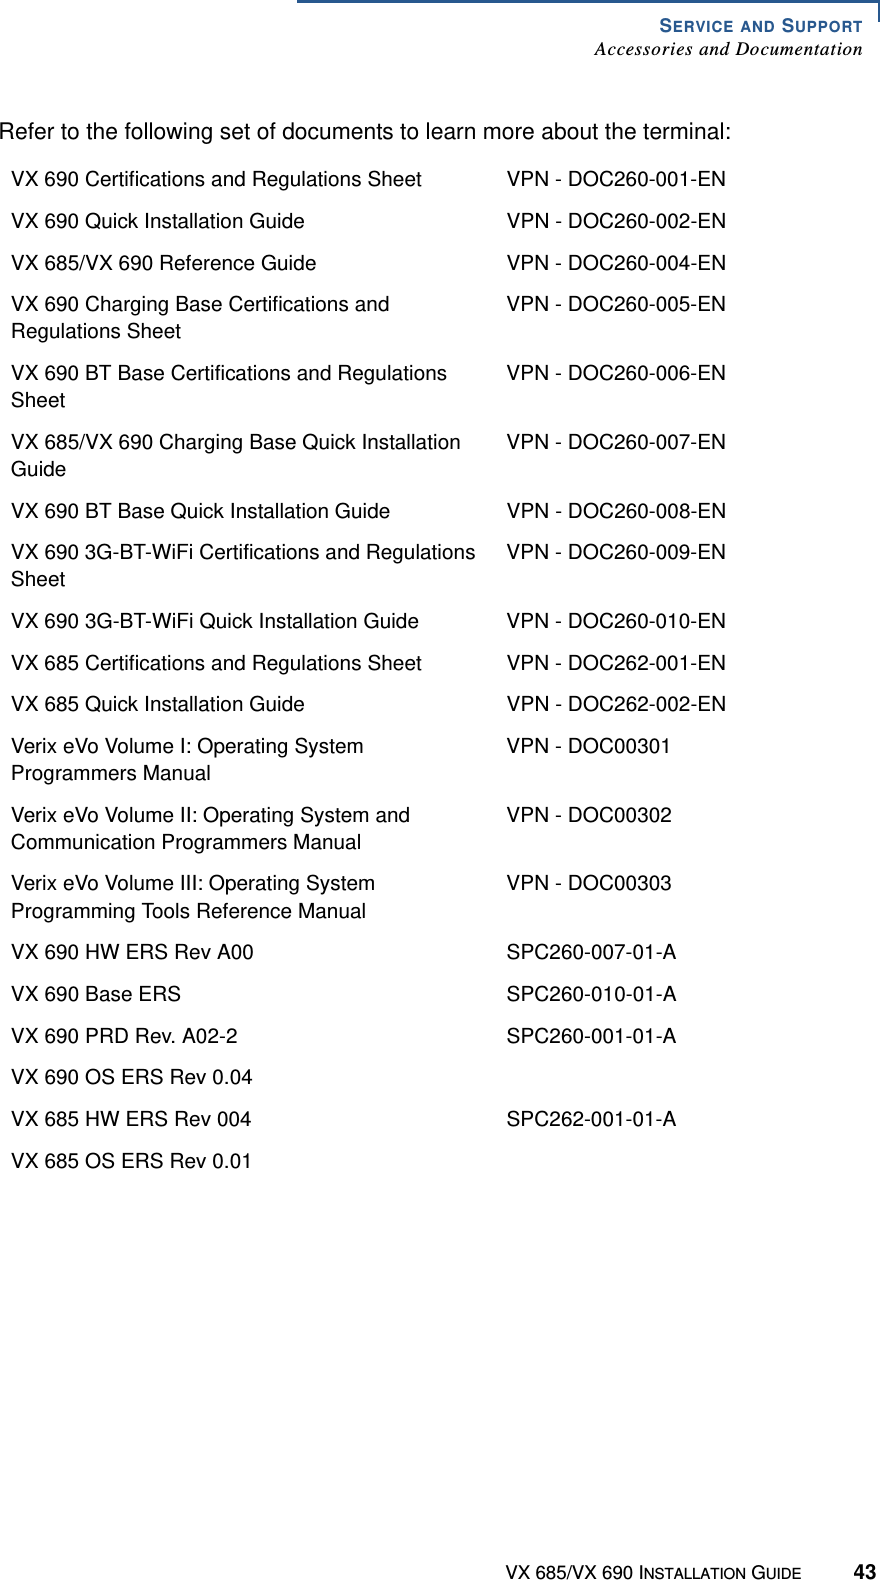 SERVICE AND SUPPORTAccessories and DocumentationVX 685/VX 690 INSTALLATION GUIDE 43Refer to the following set of documents to learn more about the terminal:VX 690 Certifications and Regulations Sheet VPN - DOC260-001-ENVX 690 Quick Installation Guide VPN - DOC260-002-ENVX 685/VX 690 Reference Guide VPN - DOC260-004-ENVX 690 Charging Base Certifications and Regulations SheetVPN - DOC260-005-ENVX 690 BT Base Certifications and Regulations SheetVPN - DOC260-006-ENVX 685/VX 690 Charging Base Quick Installation GuideVPN - DOC260-007-ENVX 690 BT Base Quick Installation Guide VPN - DOC260-008-ENVX 690 3G-BT-WiFi Certifications and Regulations SheetVPN - DOC260-009-ENVX 690 3G-BT-WiFi Quick Installation Guide VPN - DOC260-010-ENVX 685 Certifications and Regulations Sheet VPN - DOC262-001-ENVX 685 Quick Installation Guide VPN - DOC262-002-ENVerix eVo Volume I: Operating System Programmers ManualVPN - DOC00301Verix eVo Volume II: Operating System and Communication Programmers ManualVPN - DOC00302Verix eVo Volume III: Operating System Programming Tools Reference ManualVPN - DOC00303VX 690 HW ERS Rev A00 SPC260-007-01-AVX 690 Base ERS SPC260-010-01-AVX 690 PRD Rev. A02-2 SPC260-001-01-AVX 690 OS ERS Rev 0.04VX 685 HW ERS Rev 004 SPC262-001-01-AVX 685 OS ERS Rev 0.01